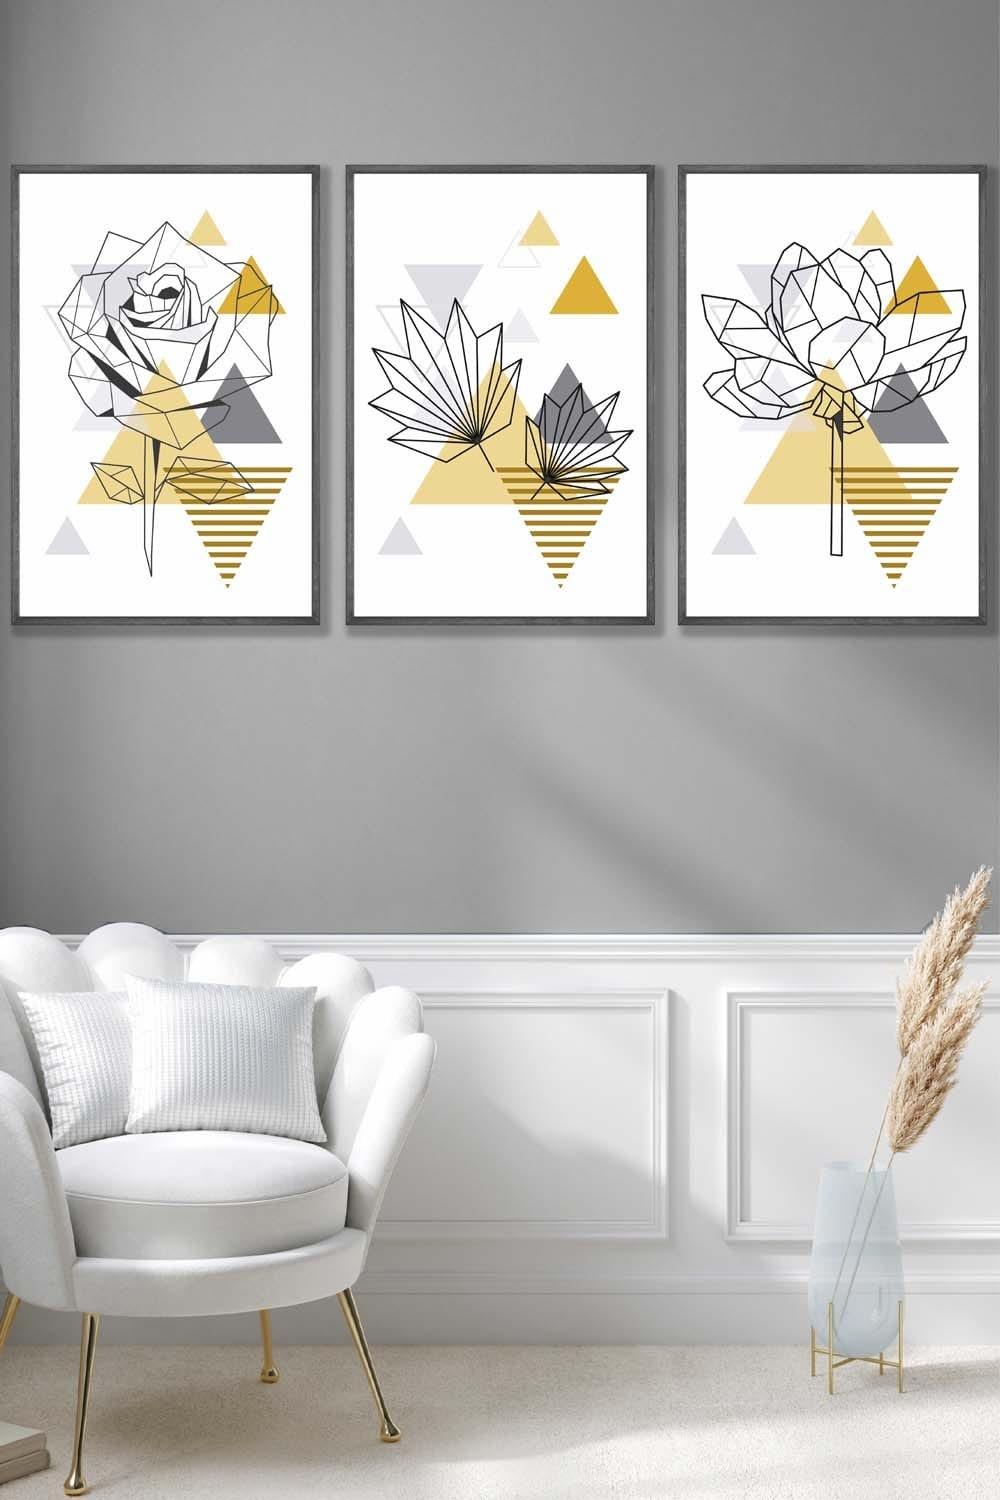 Framed Yellow and Grey Geometric Flowers Framed Wall Art - Large